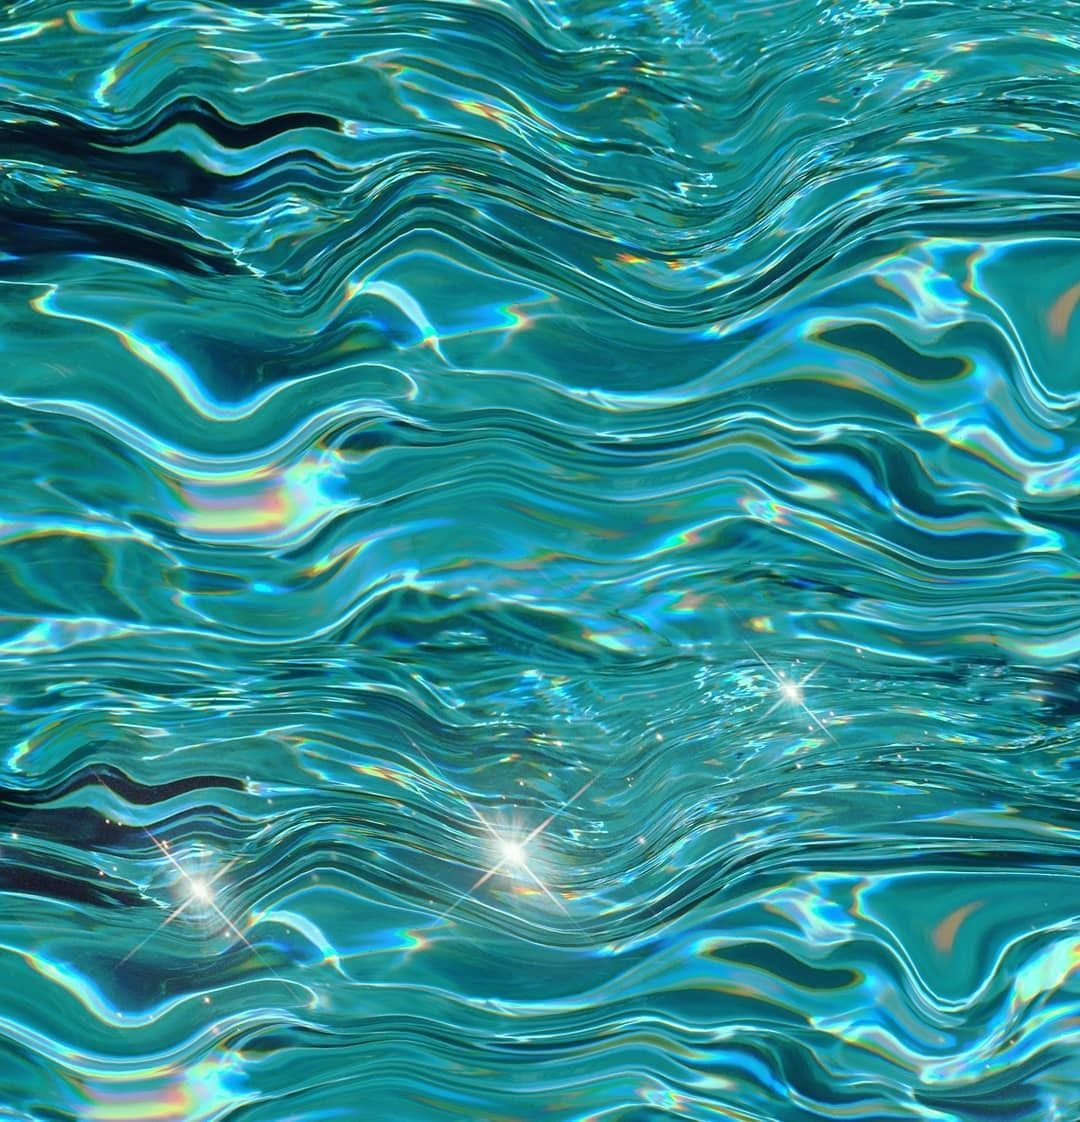 A digital painting of a sparkling blue pool of water. - Turquoise, cyan